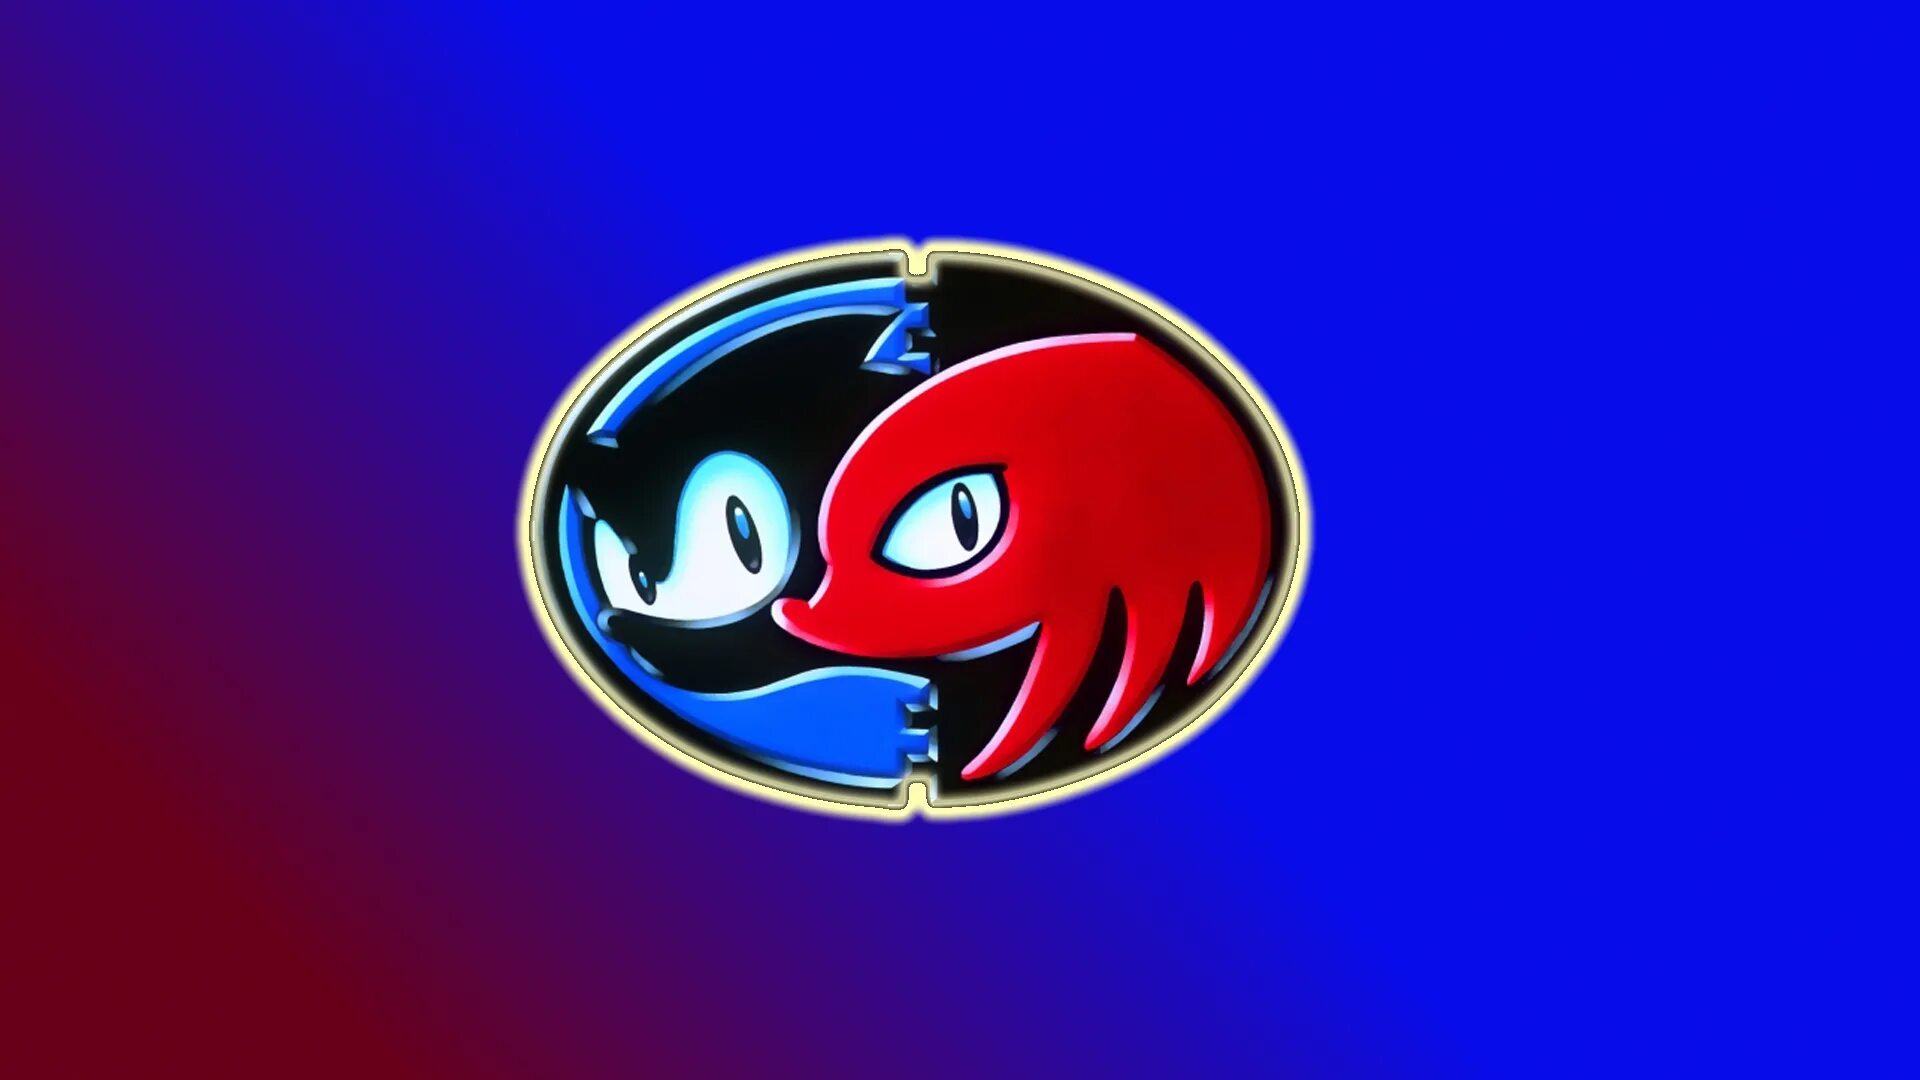 Sonic and knuckles download. Sonic & Knuckles. НАКЛЗ логотип. Соник и НАКЛЗ лого. Лого Соник 3 и НАКЛЗ.